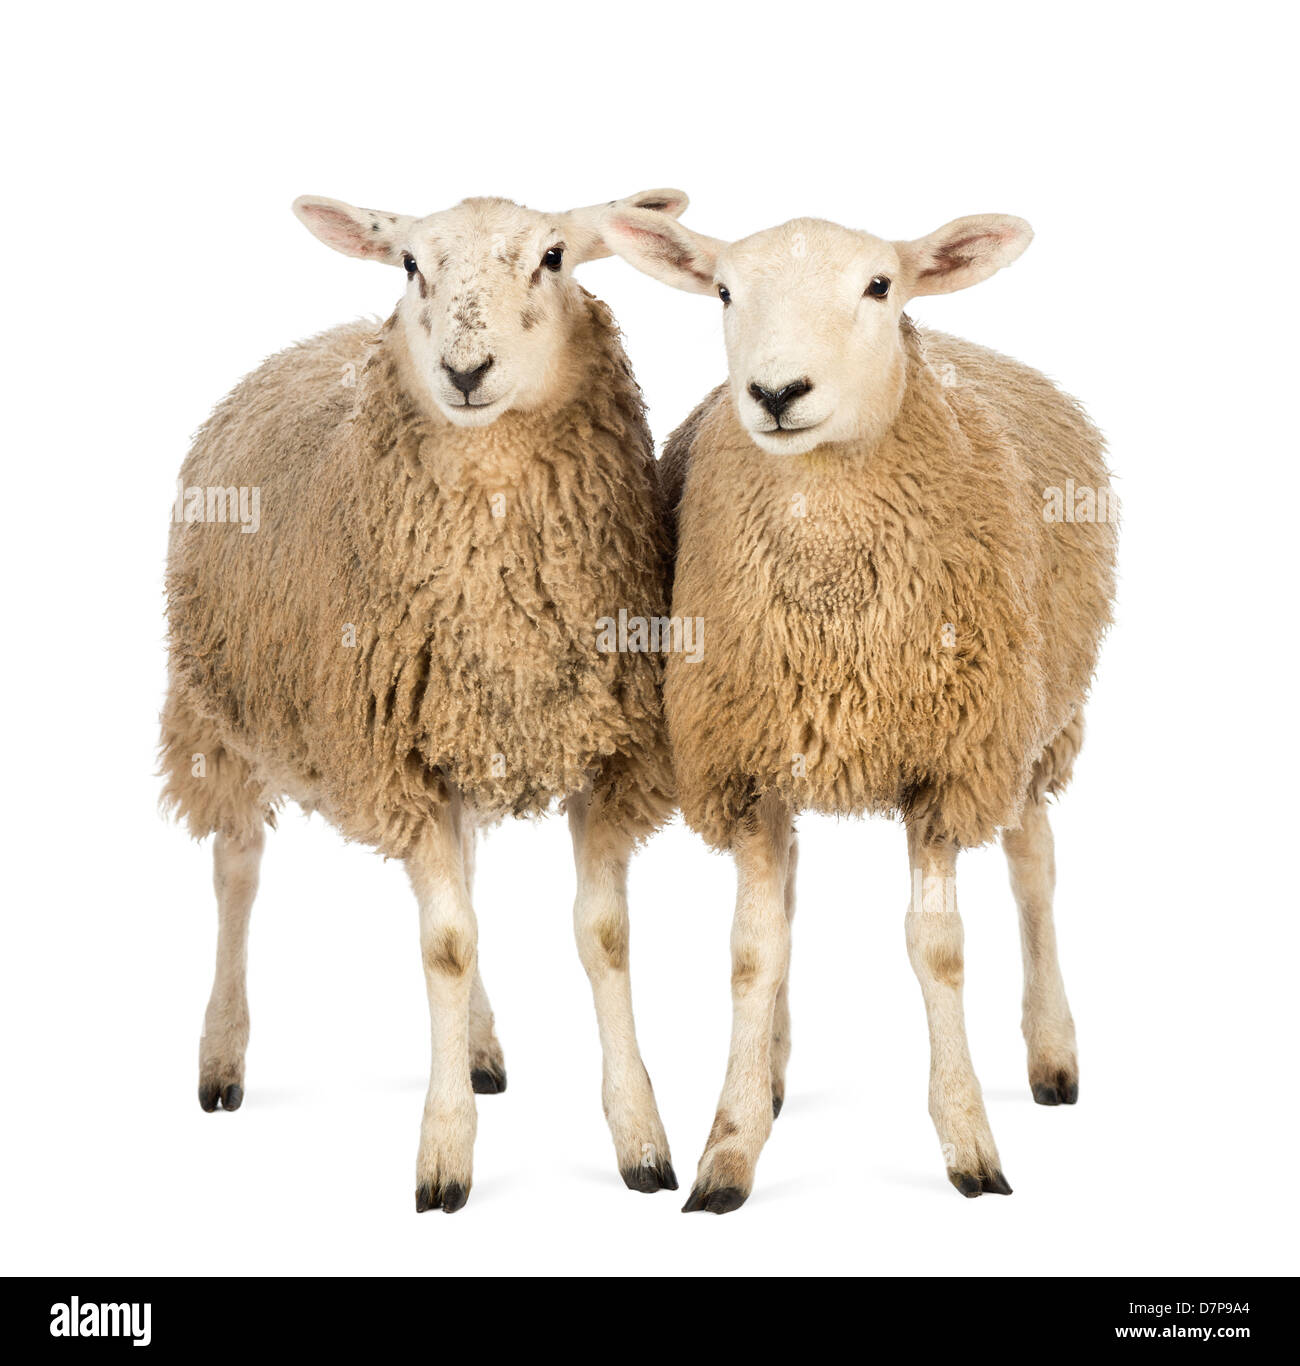 Two Sheep standing in front of white background Stock Photo